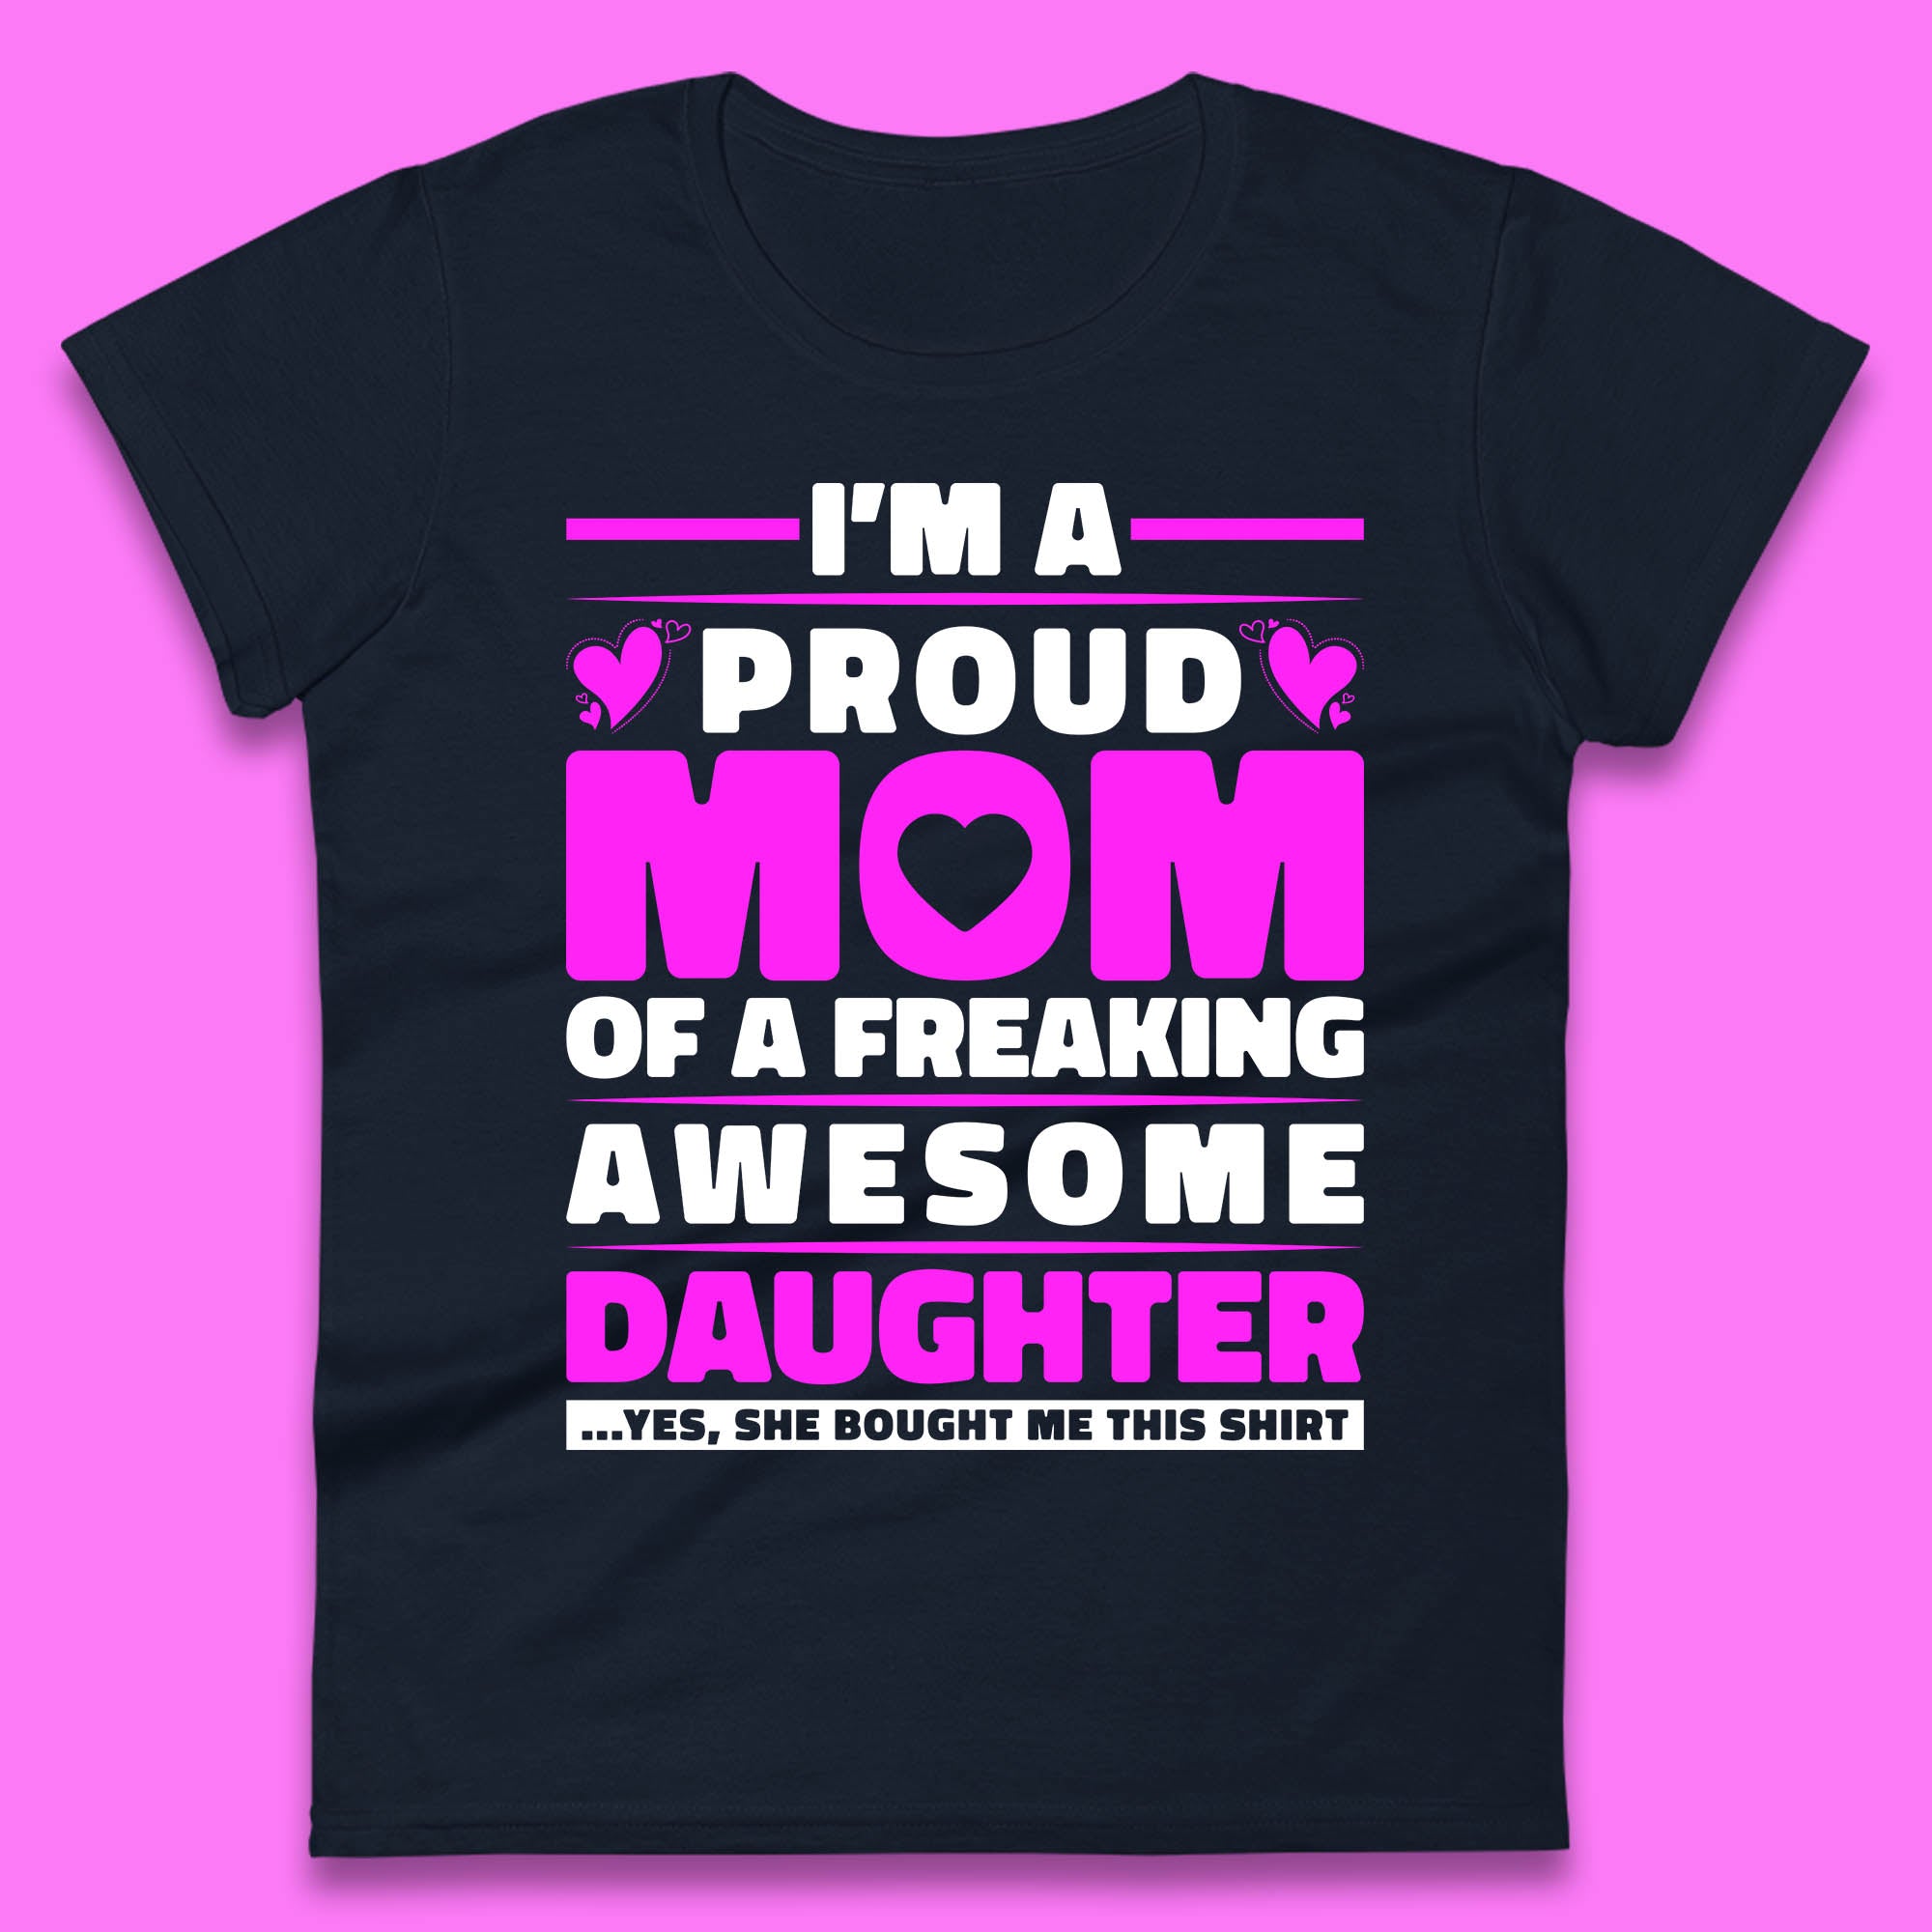 I'm A Proud Mom Of A Freaking Awesome Daughter Funny Womens Tee Top